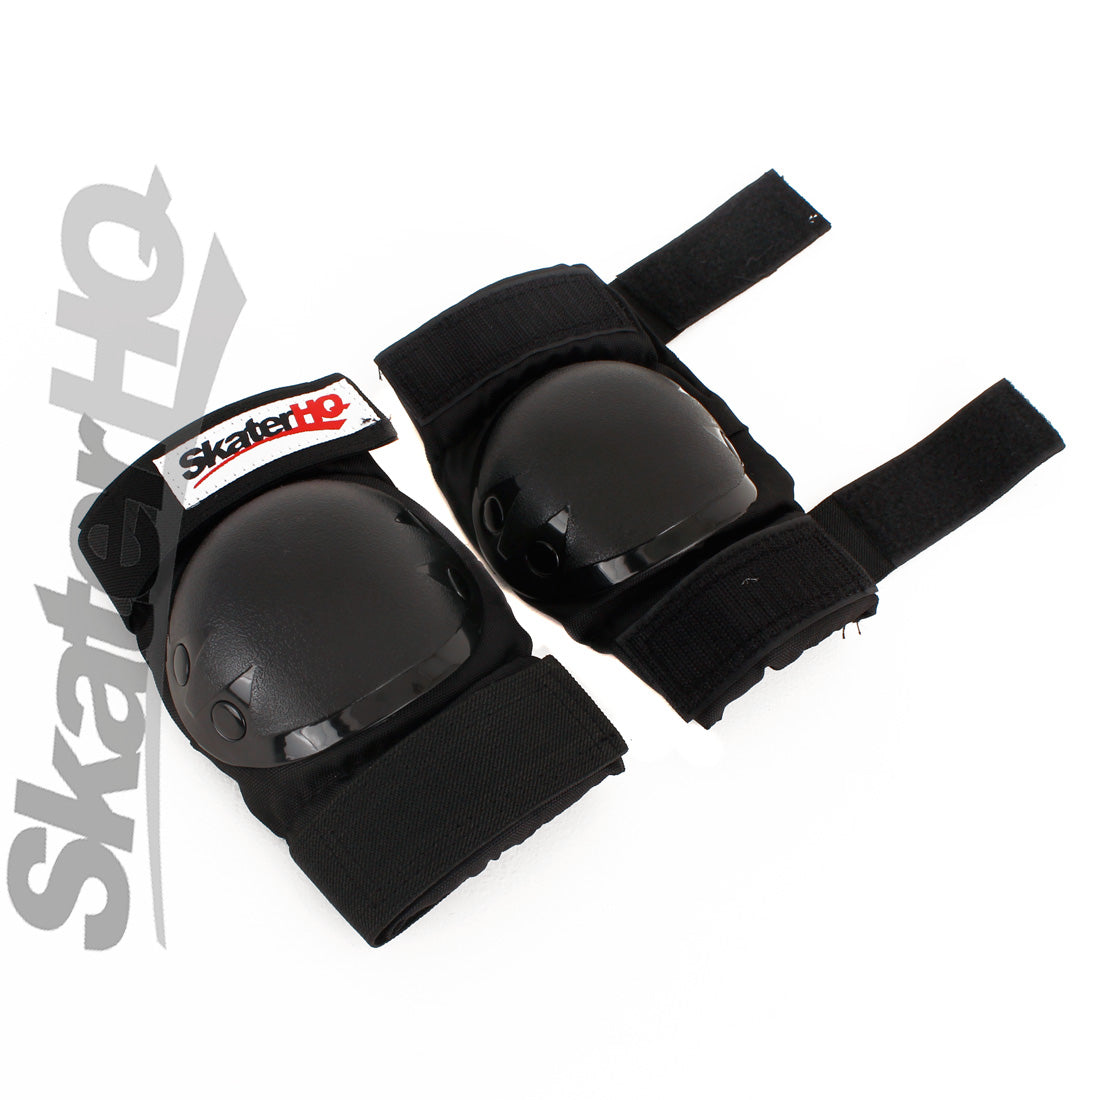 Skater HQ Knee Pads - Junior Protective Gear